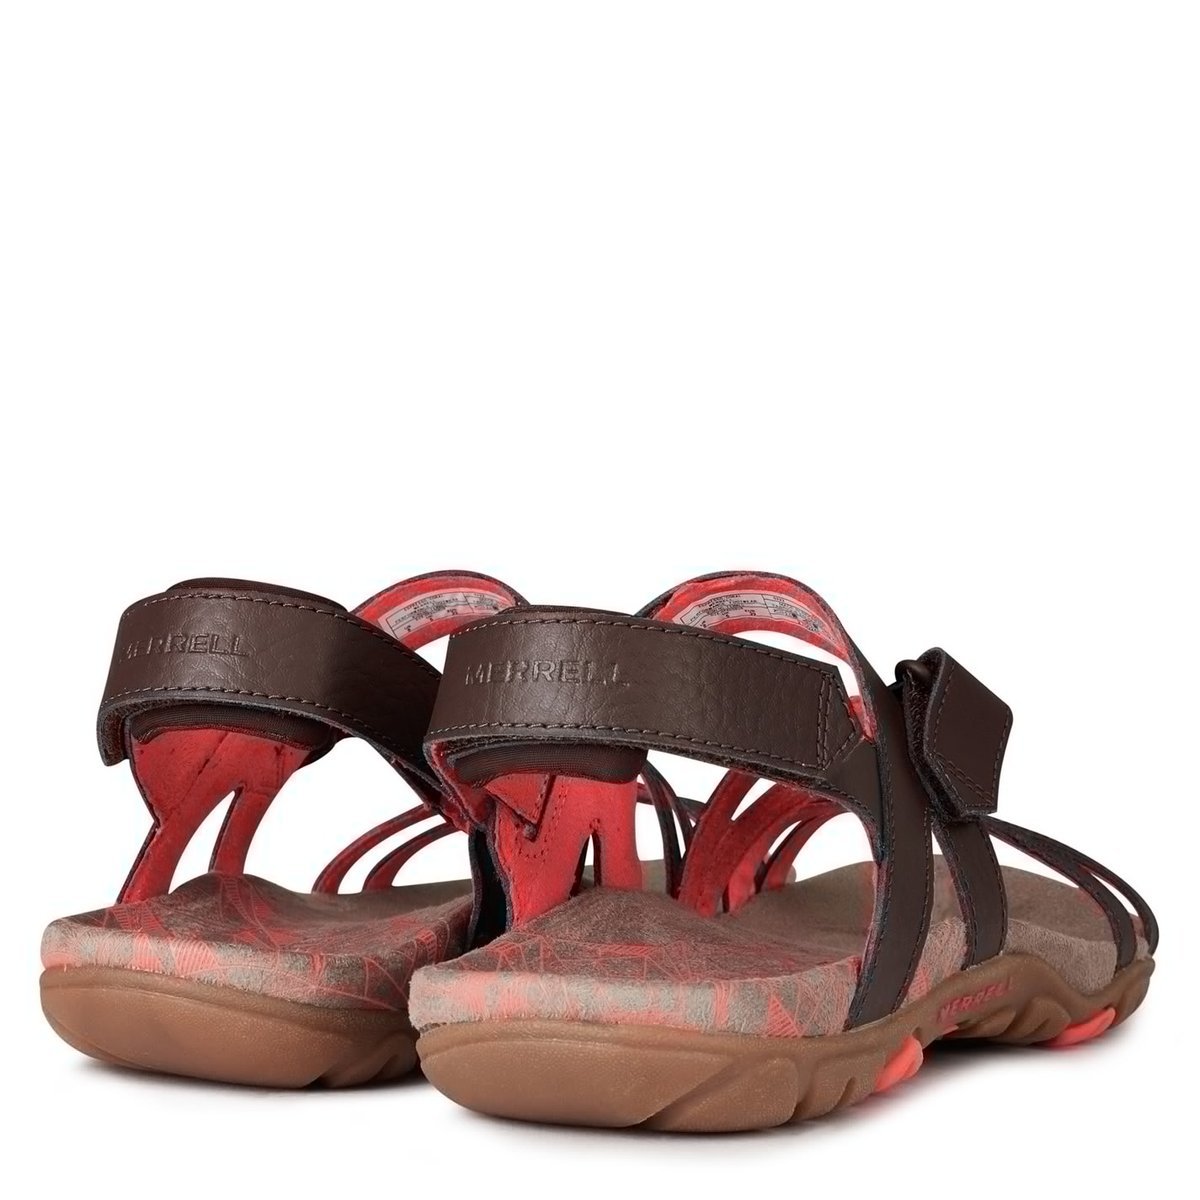 Merrell Sandspur Cocoa/Coral Strap Slingback Sndls | Brown strappy sandals,  Lattice sandals, Womens brown flats